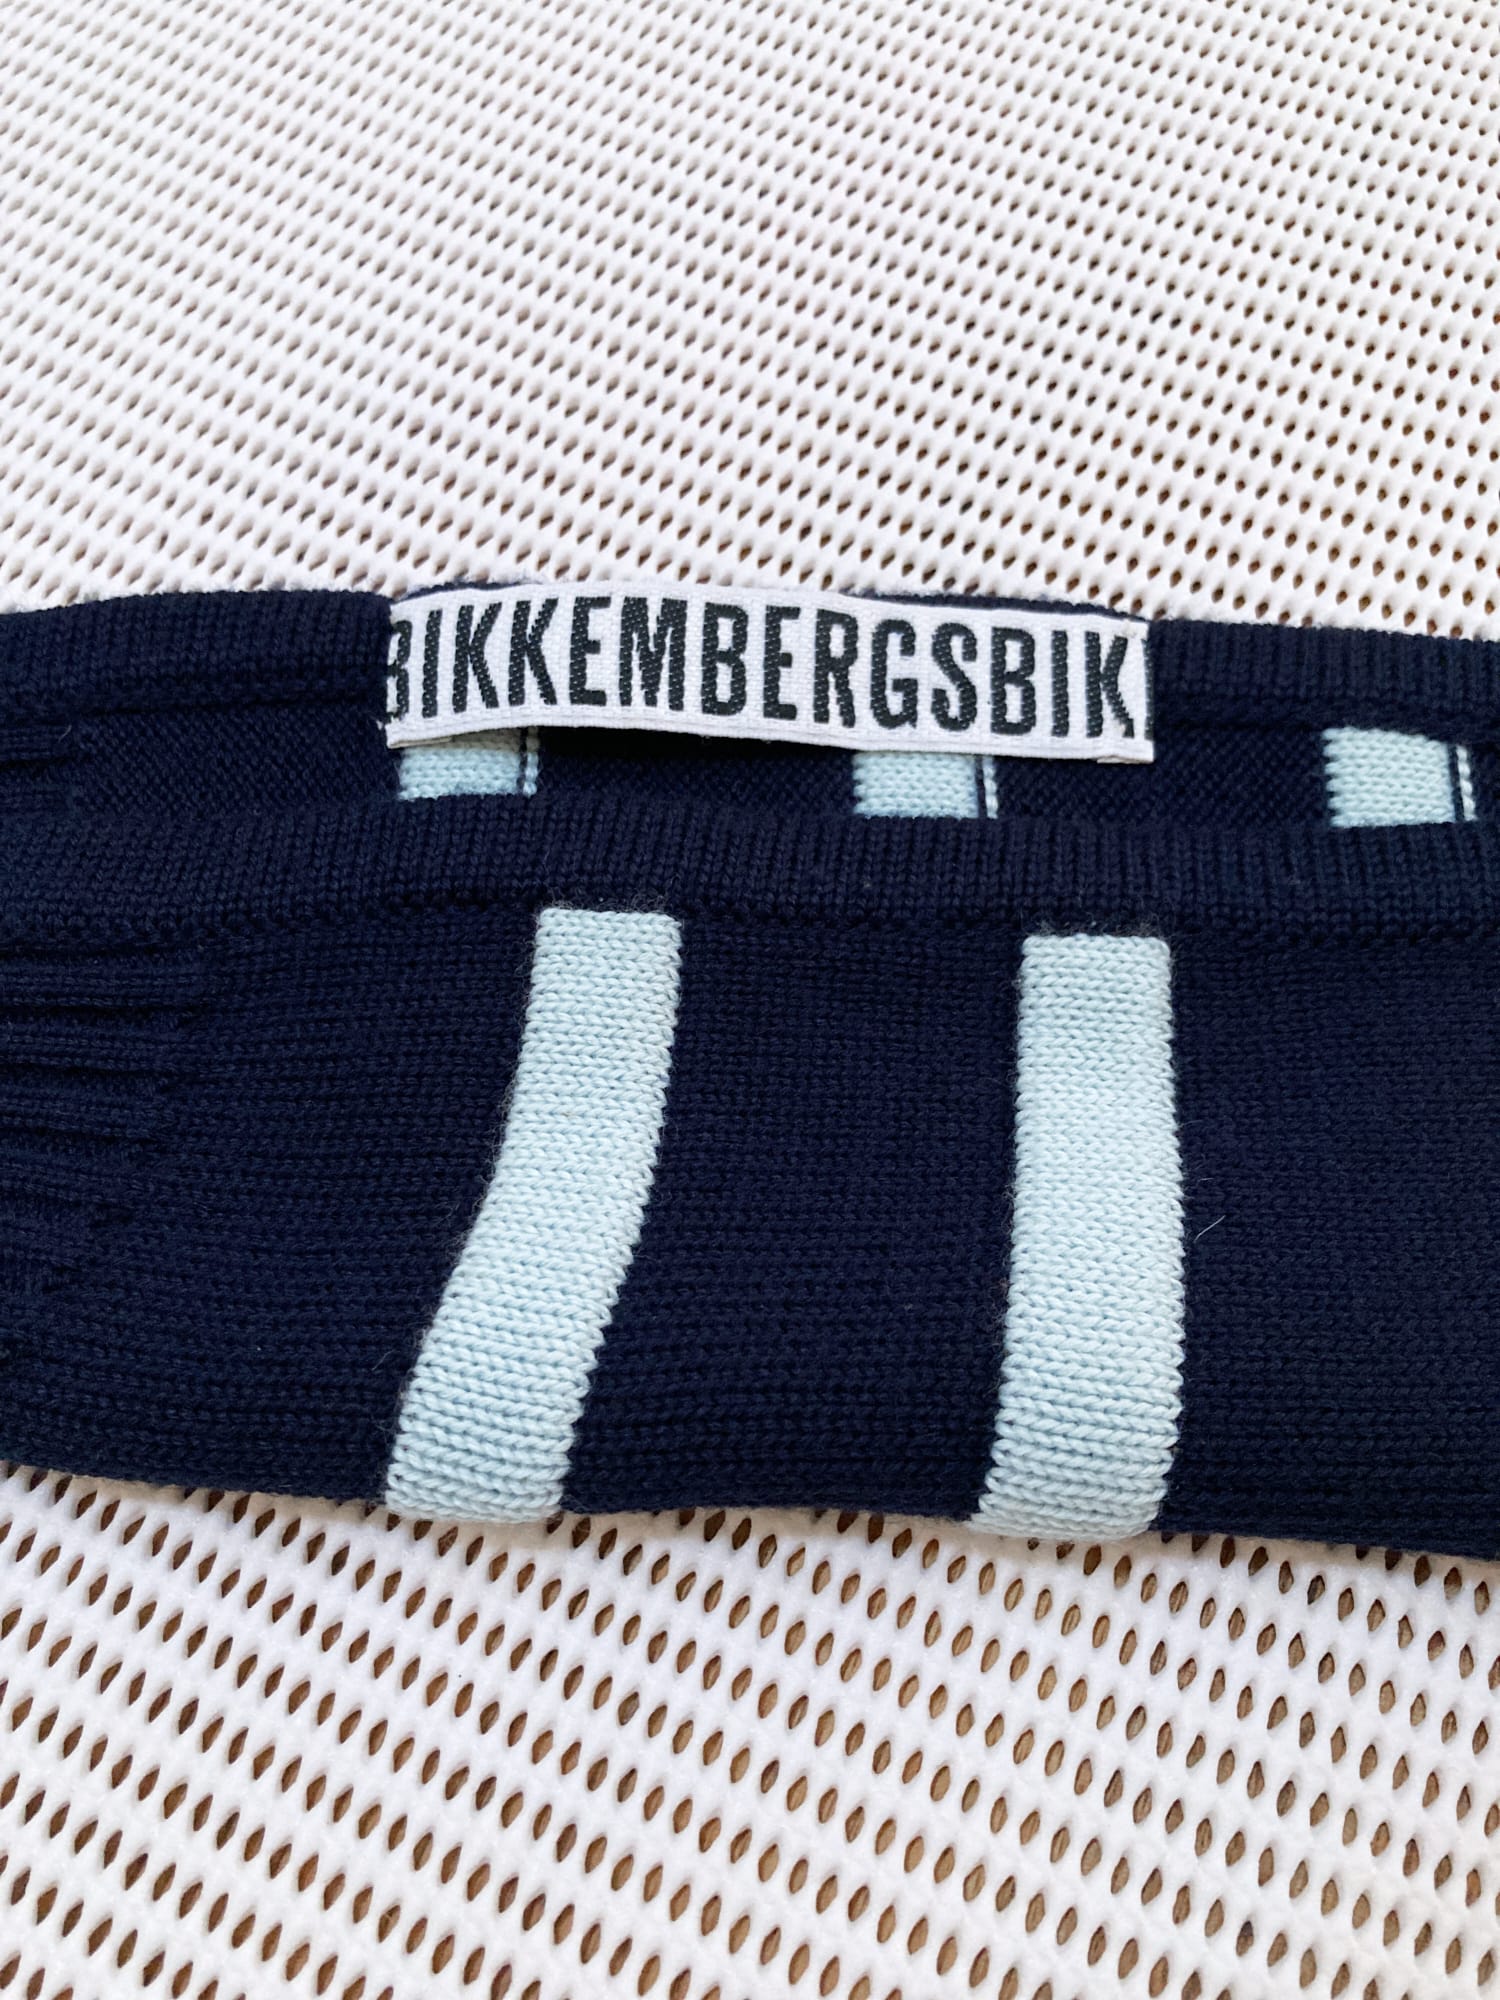 Dirk Bikkembergs 1990s 2000s navy wool neck warmer scarf with pale blue stripes